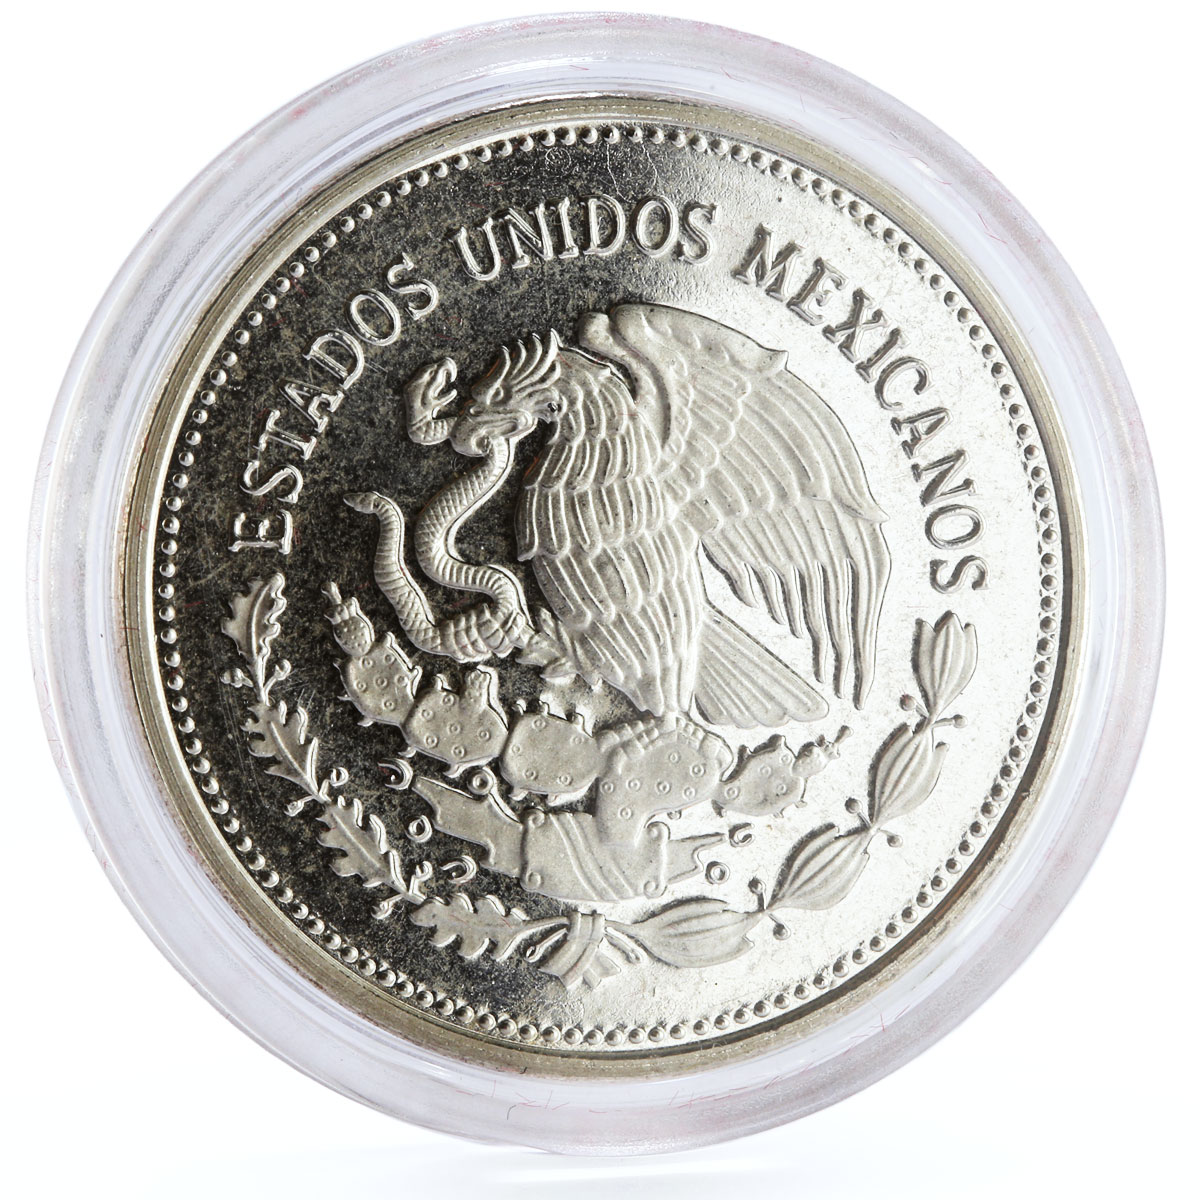 Mexico 500 pesos 75th Anniversary of 1910 Revolution proof silver coin 1985